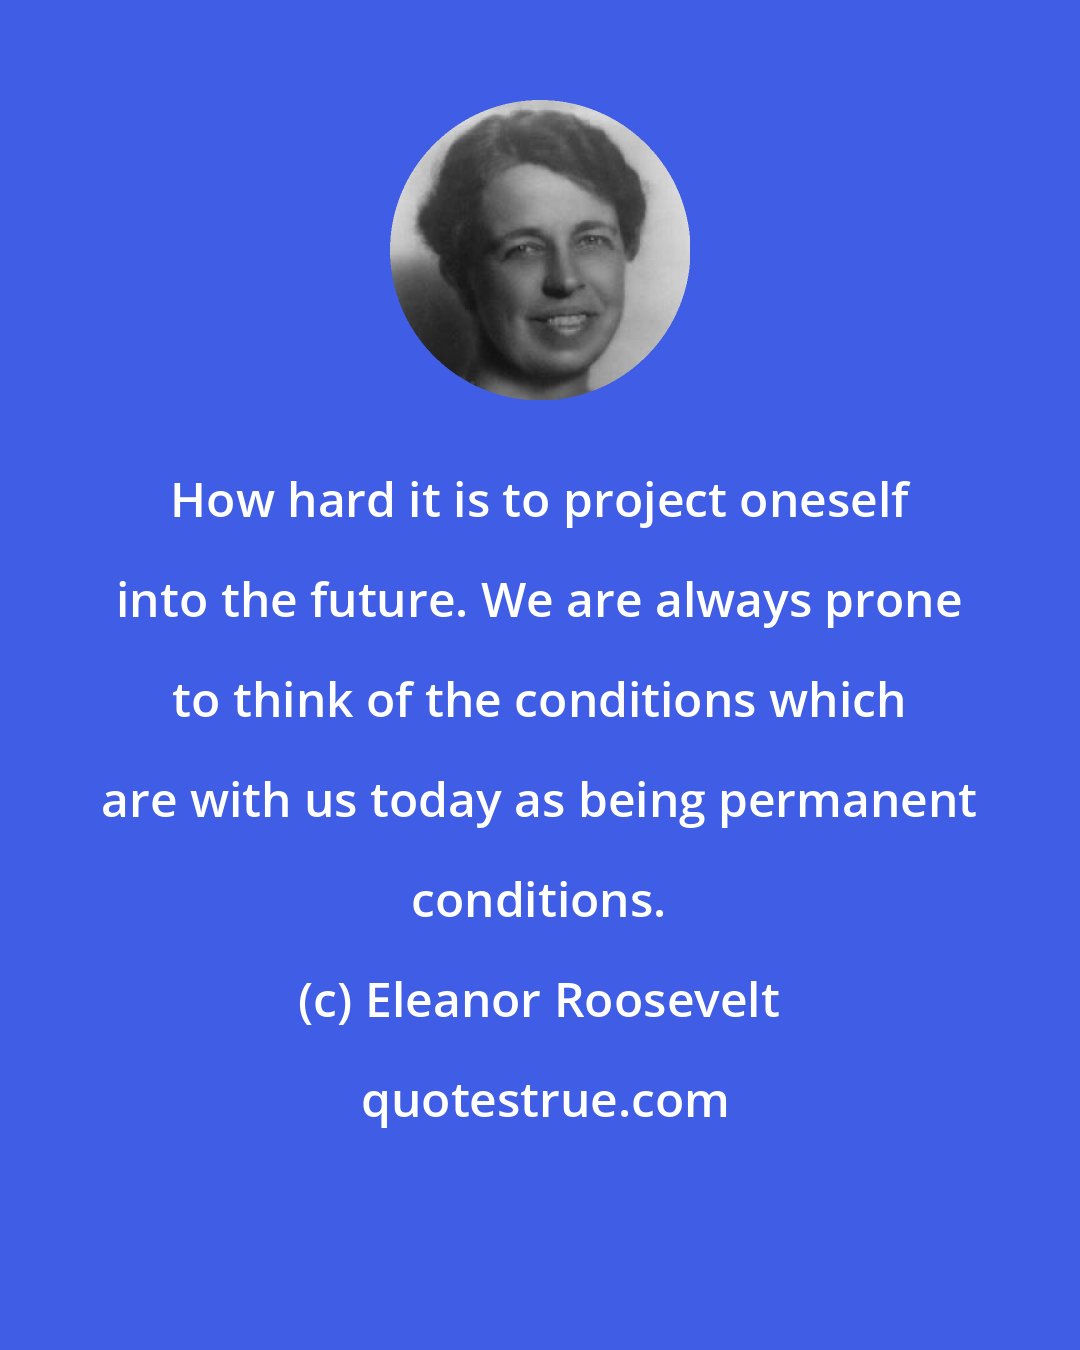 Eleanor Roosevelt: How hard it is to project oneself into the future. We are always prone to think of the conditions which are with us today as being permanent conditions.